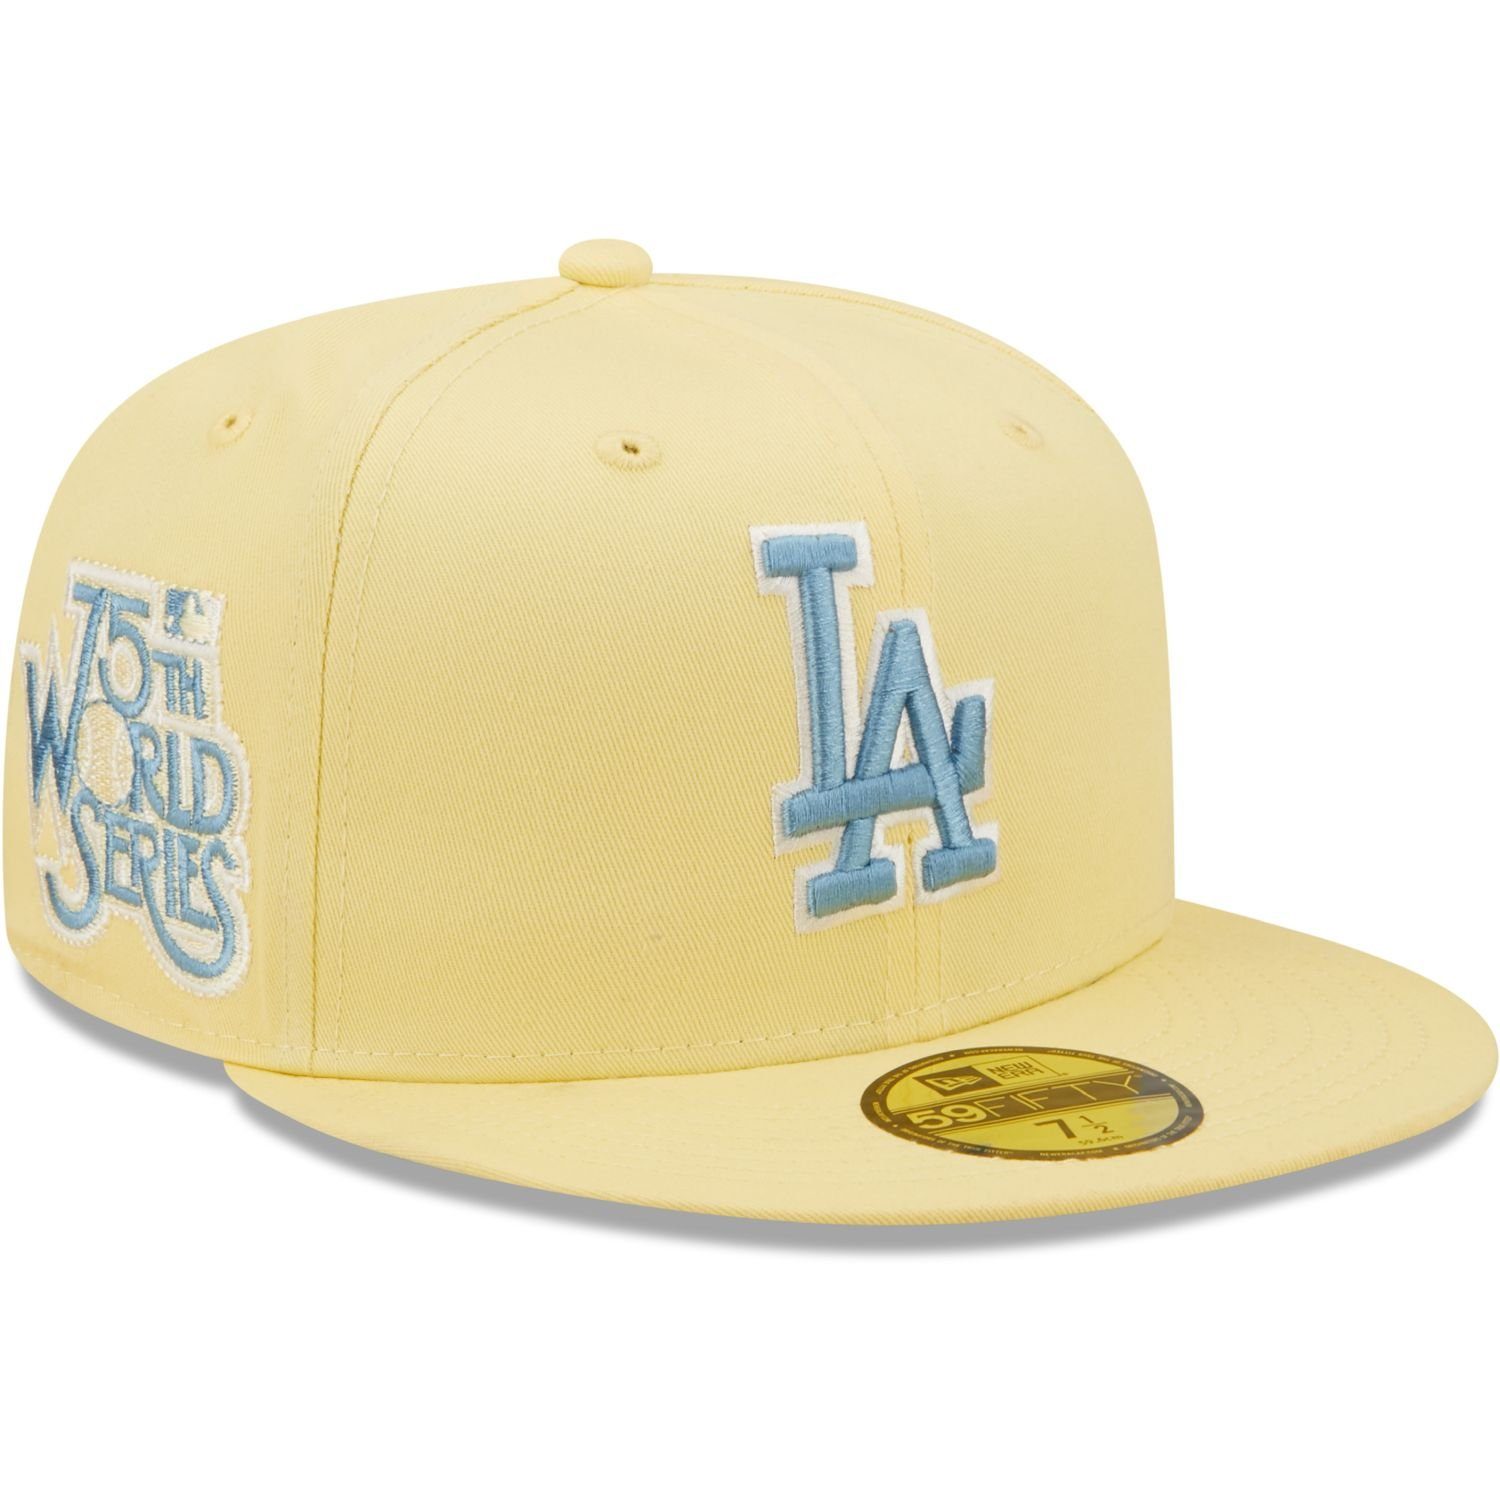 59Fifty Los Dodgers Era Cap Fitted COOPERSTOWN Angeles New